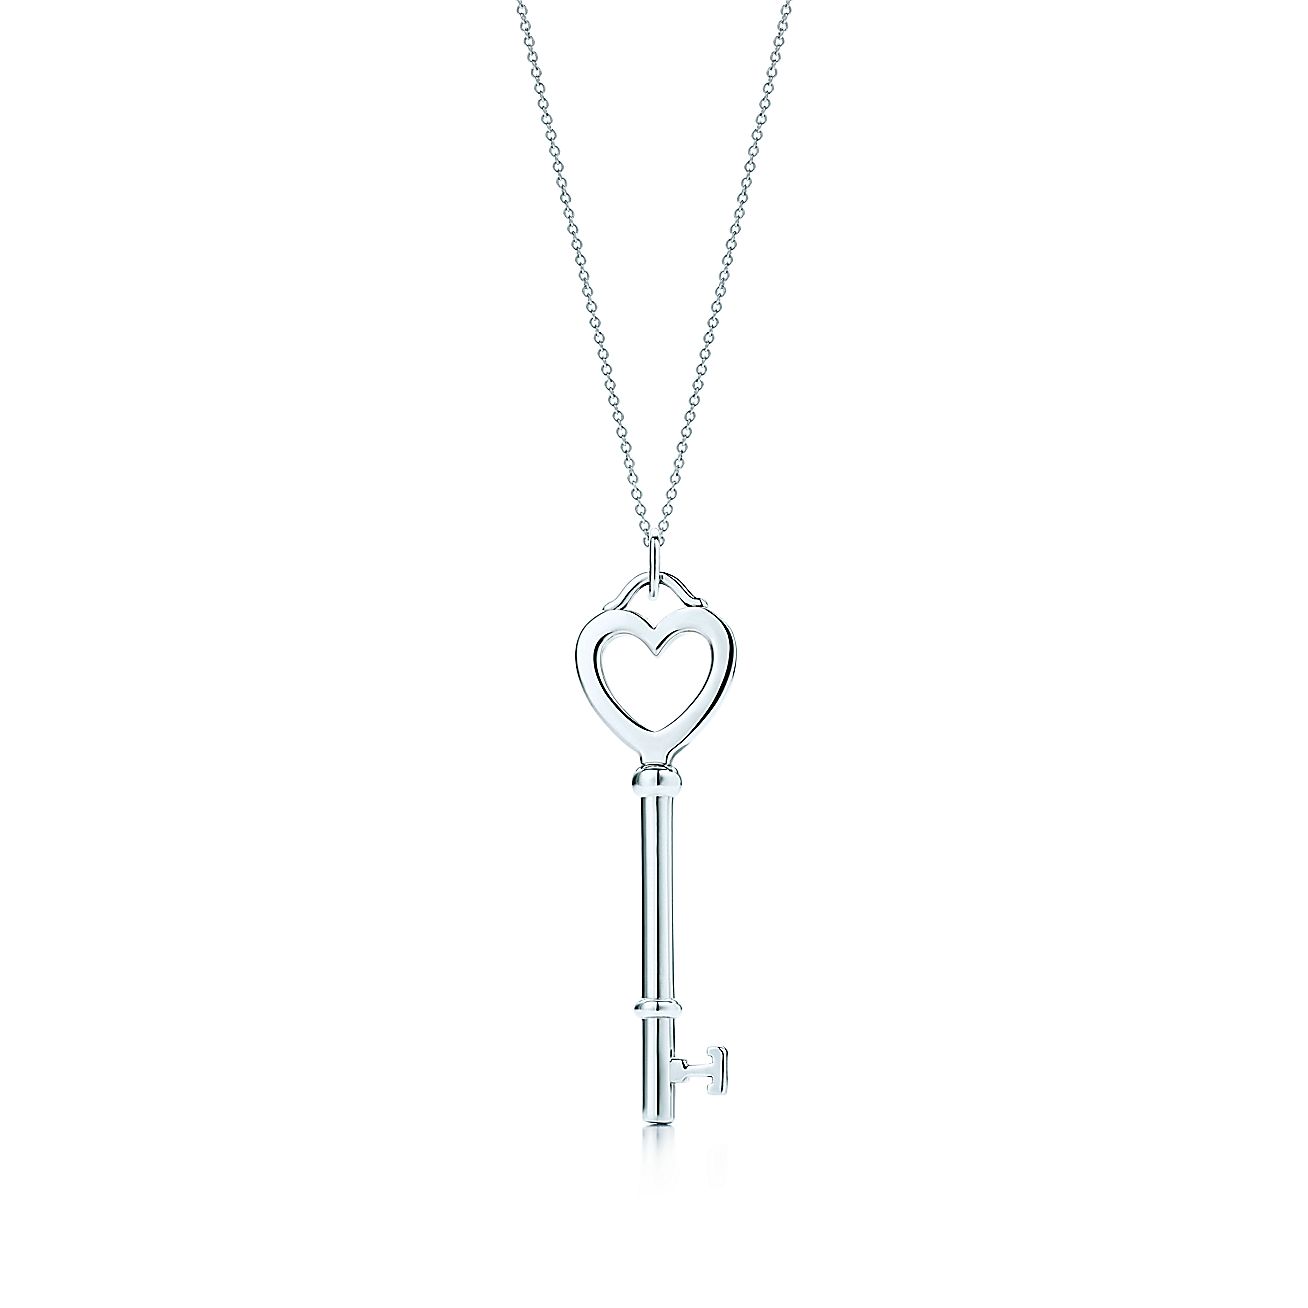 Tiffany Keys Heart Key Pendant In Sterling Silver On A Chain Tiffany And Co 2389